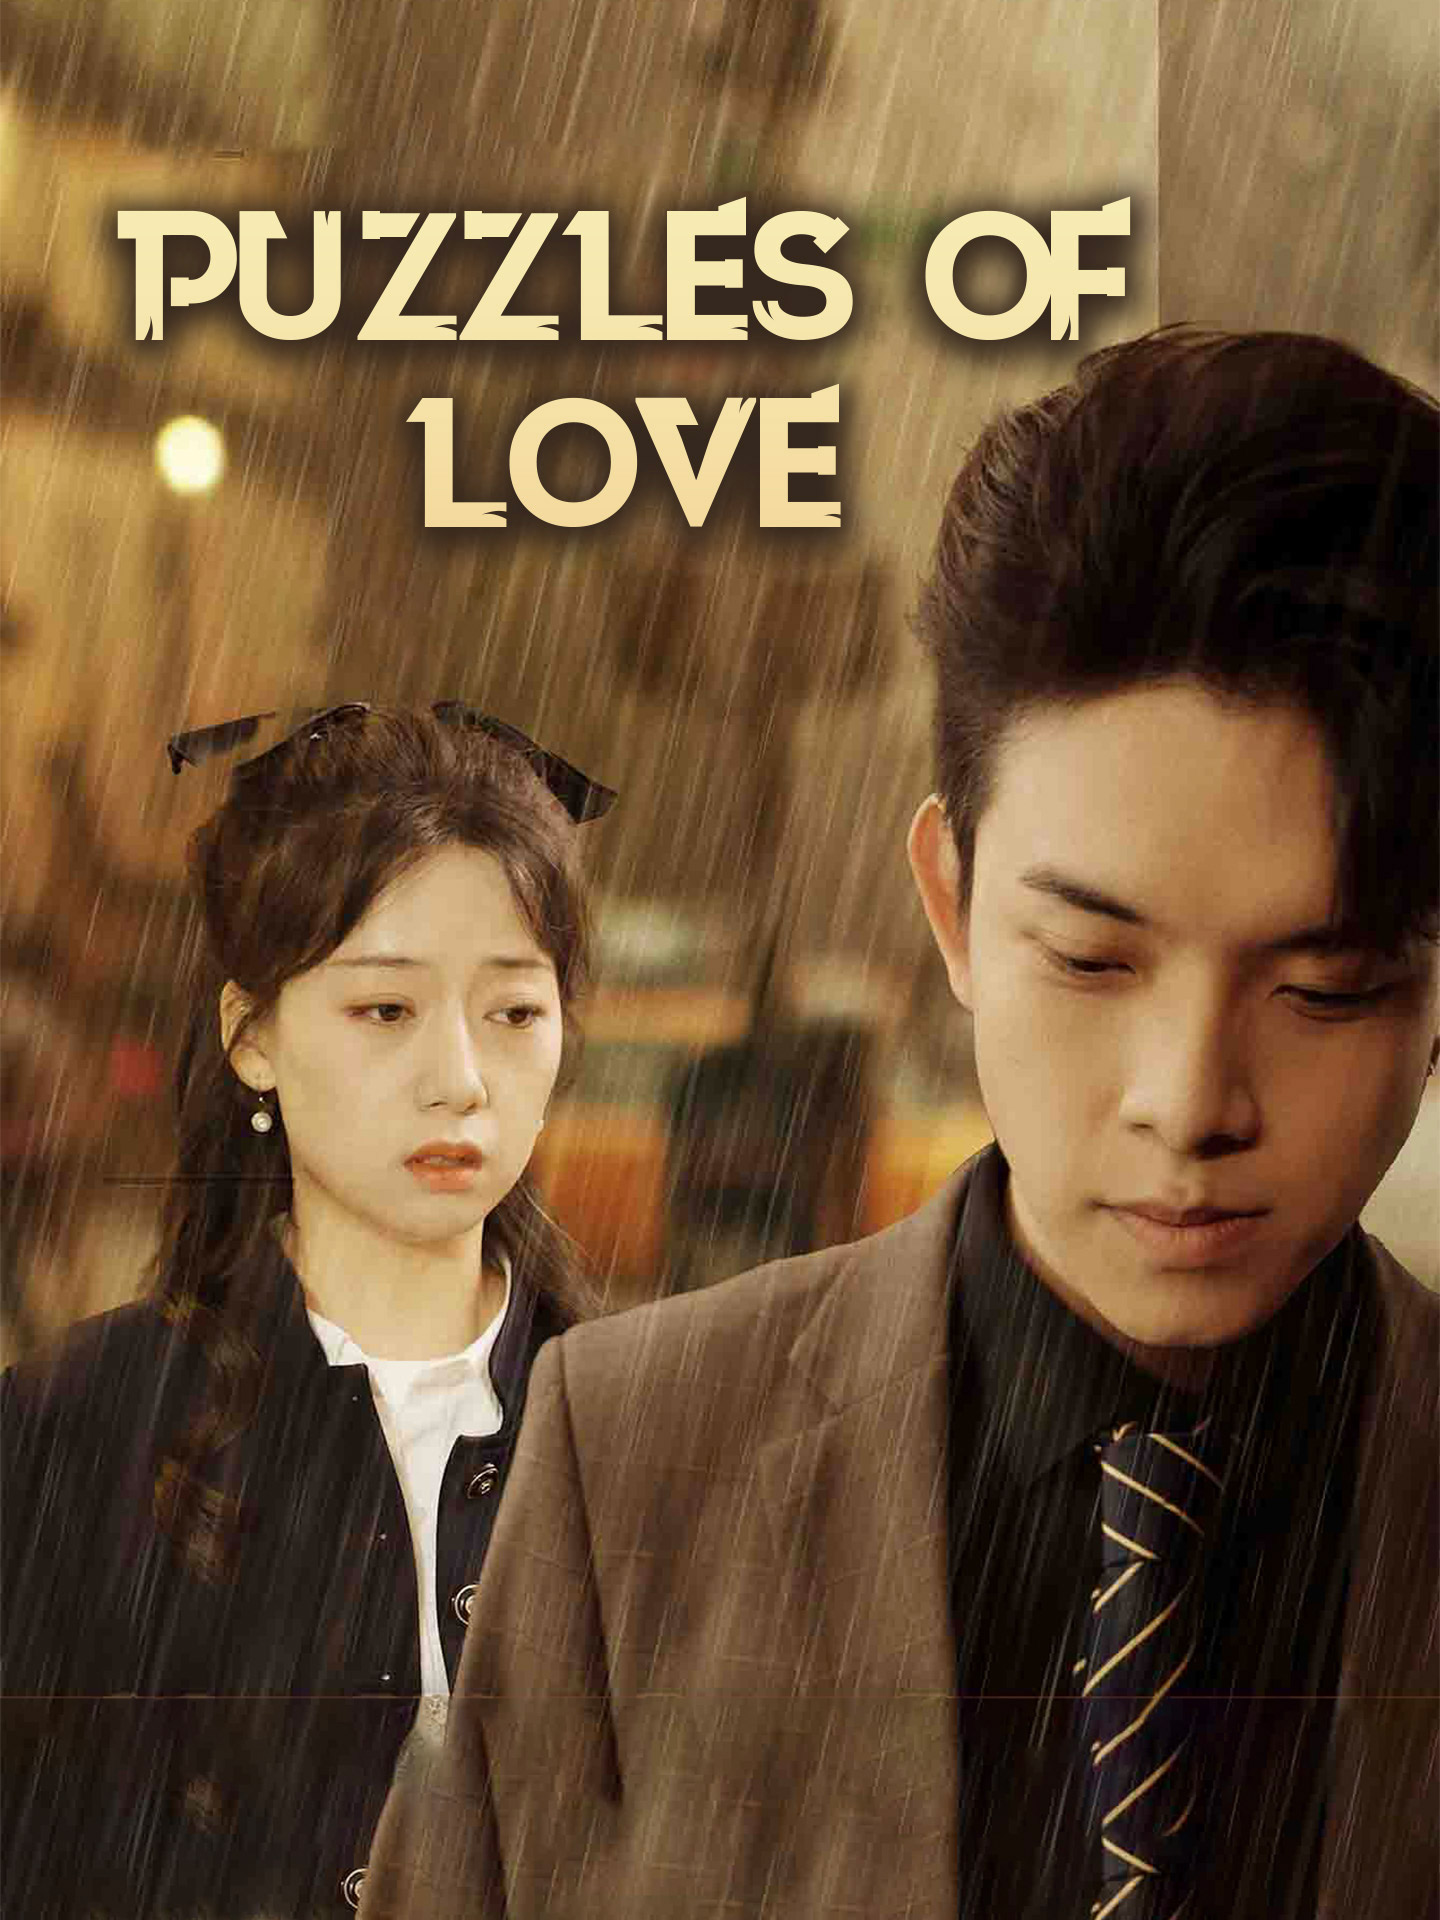 Puzzles of Love